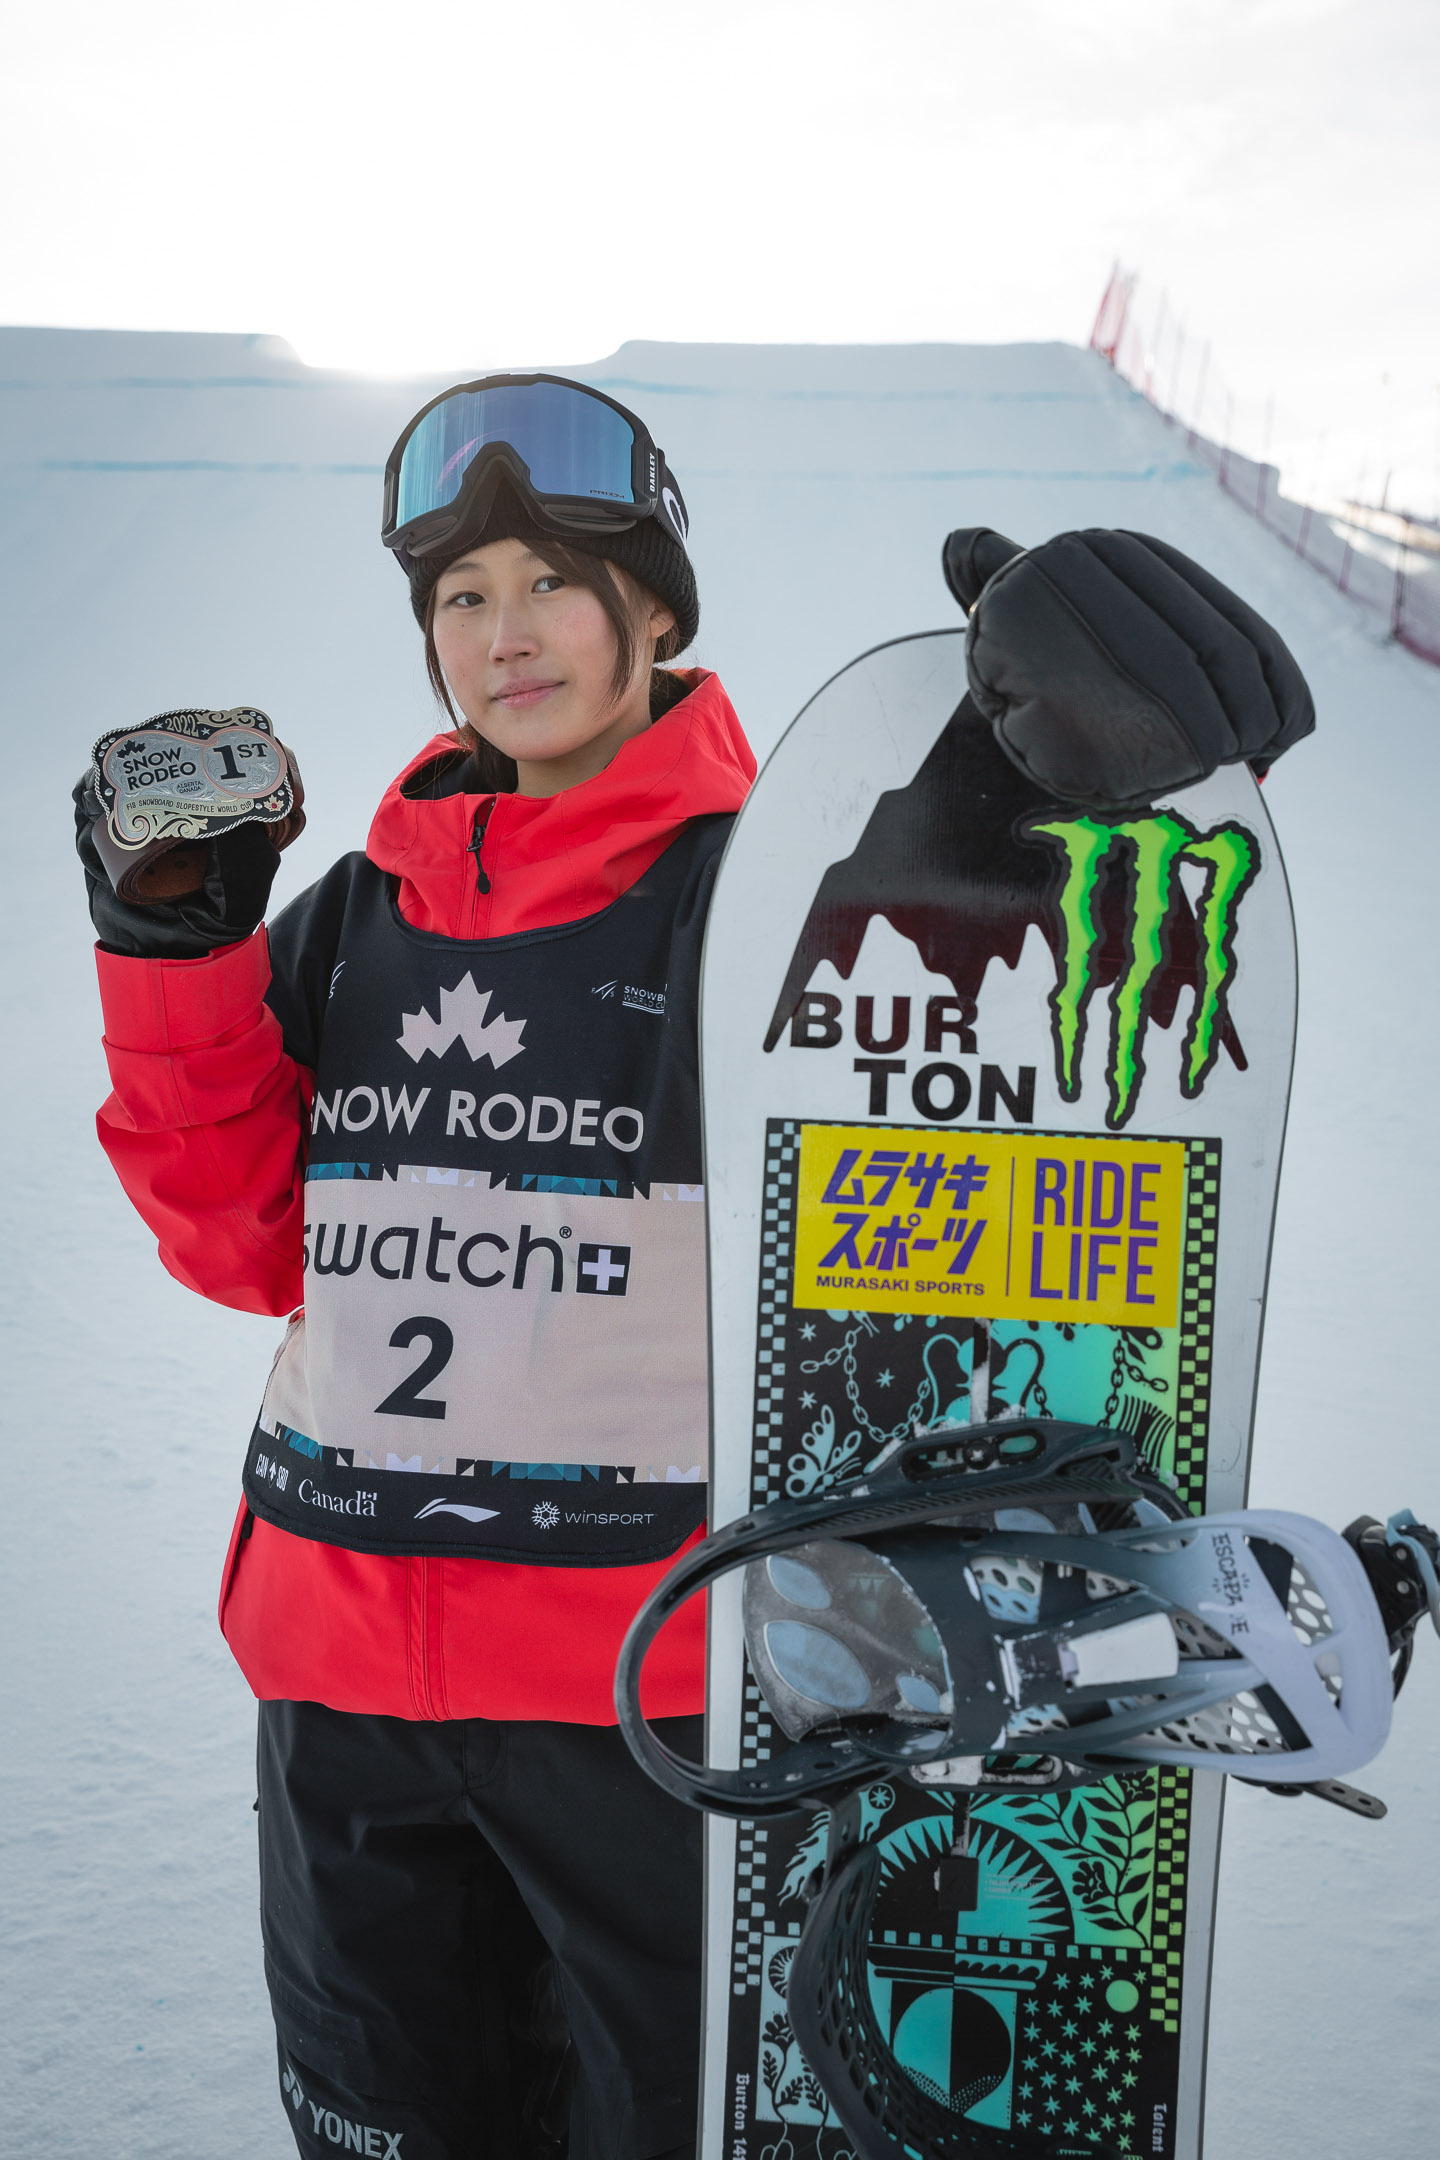 Monster Energy’s Kokomo Murase Claims Victory in Women’s Snowboard Slopestyle at Snow Rodeo Competition in Calgary